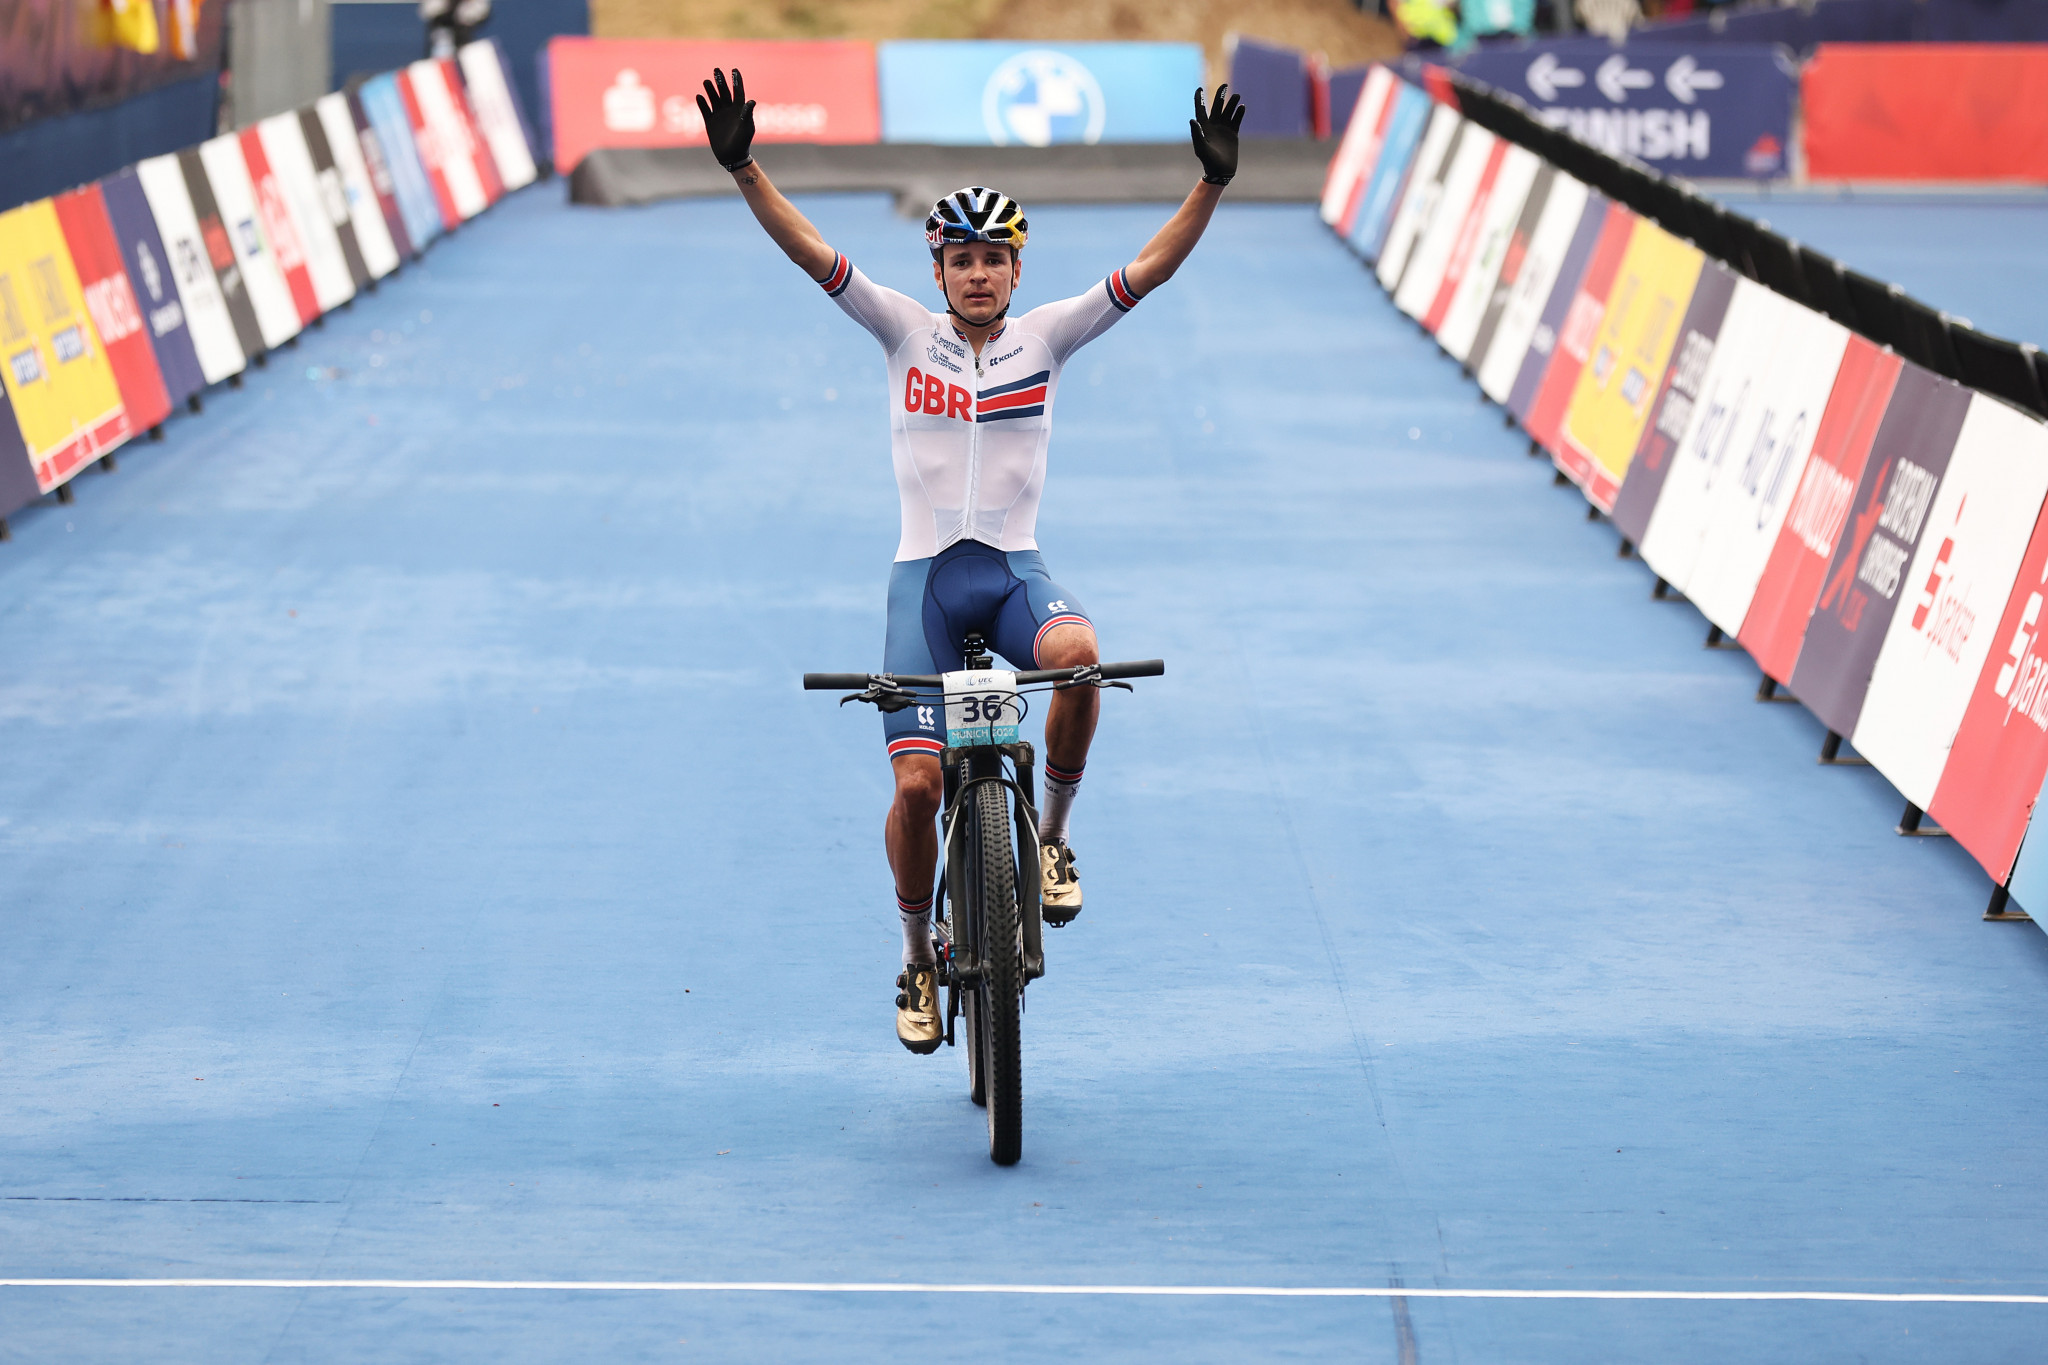 Britain's Tom Pidcock broke clear to take men's mountain bike cross-country gold at Munich 2022 ©Getty Images